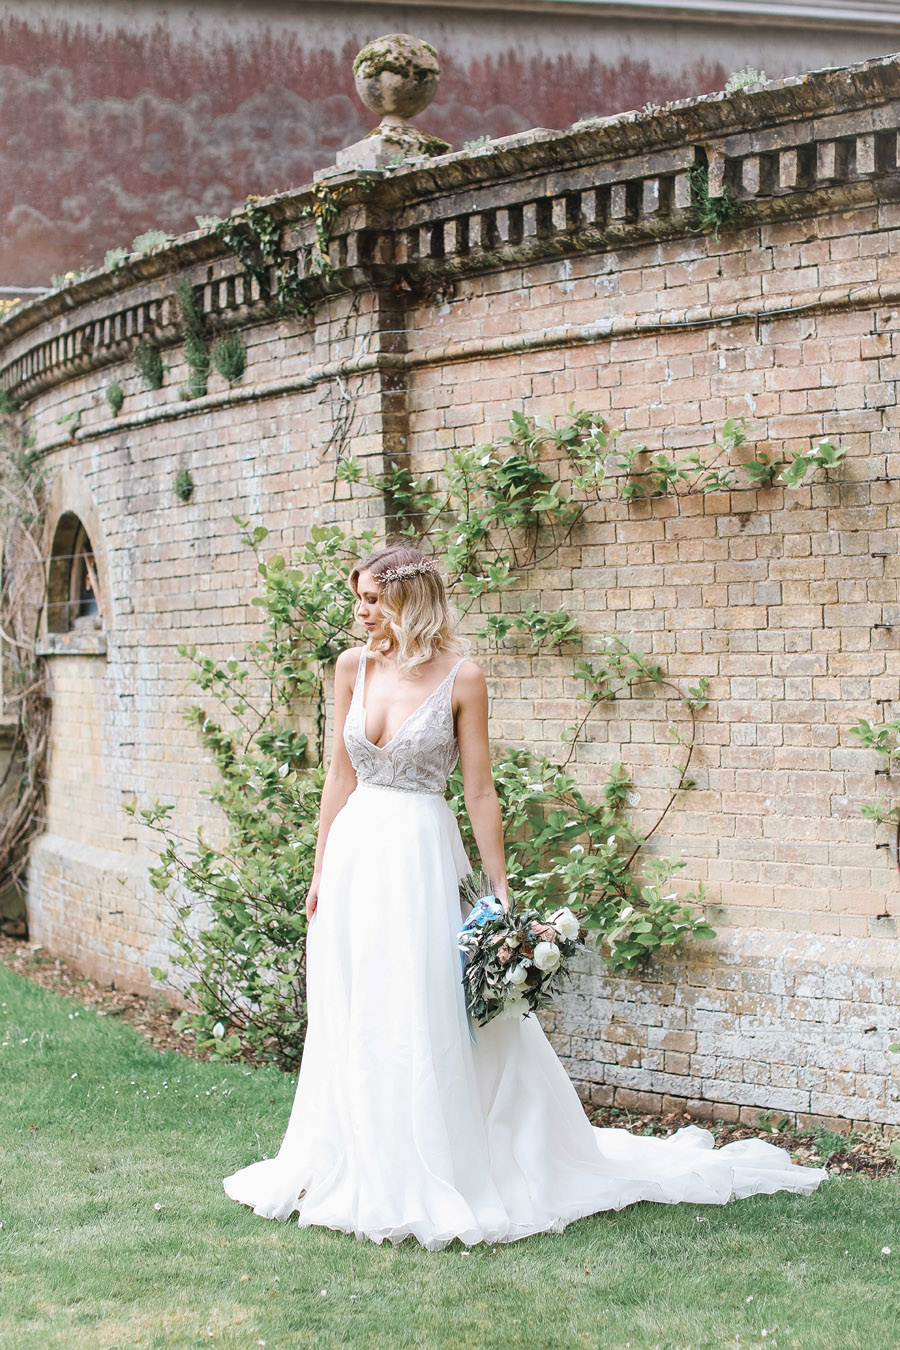 Romantic wedding ideas from Hale Park, photo by Charlotte Wise Photography (23)